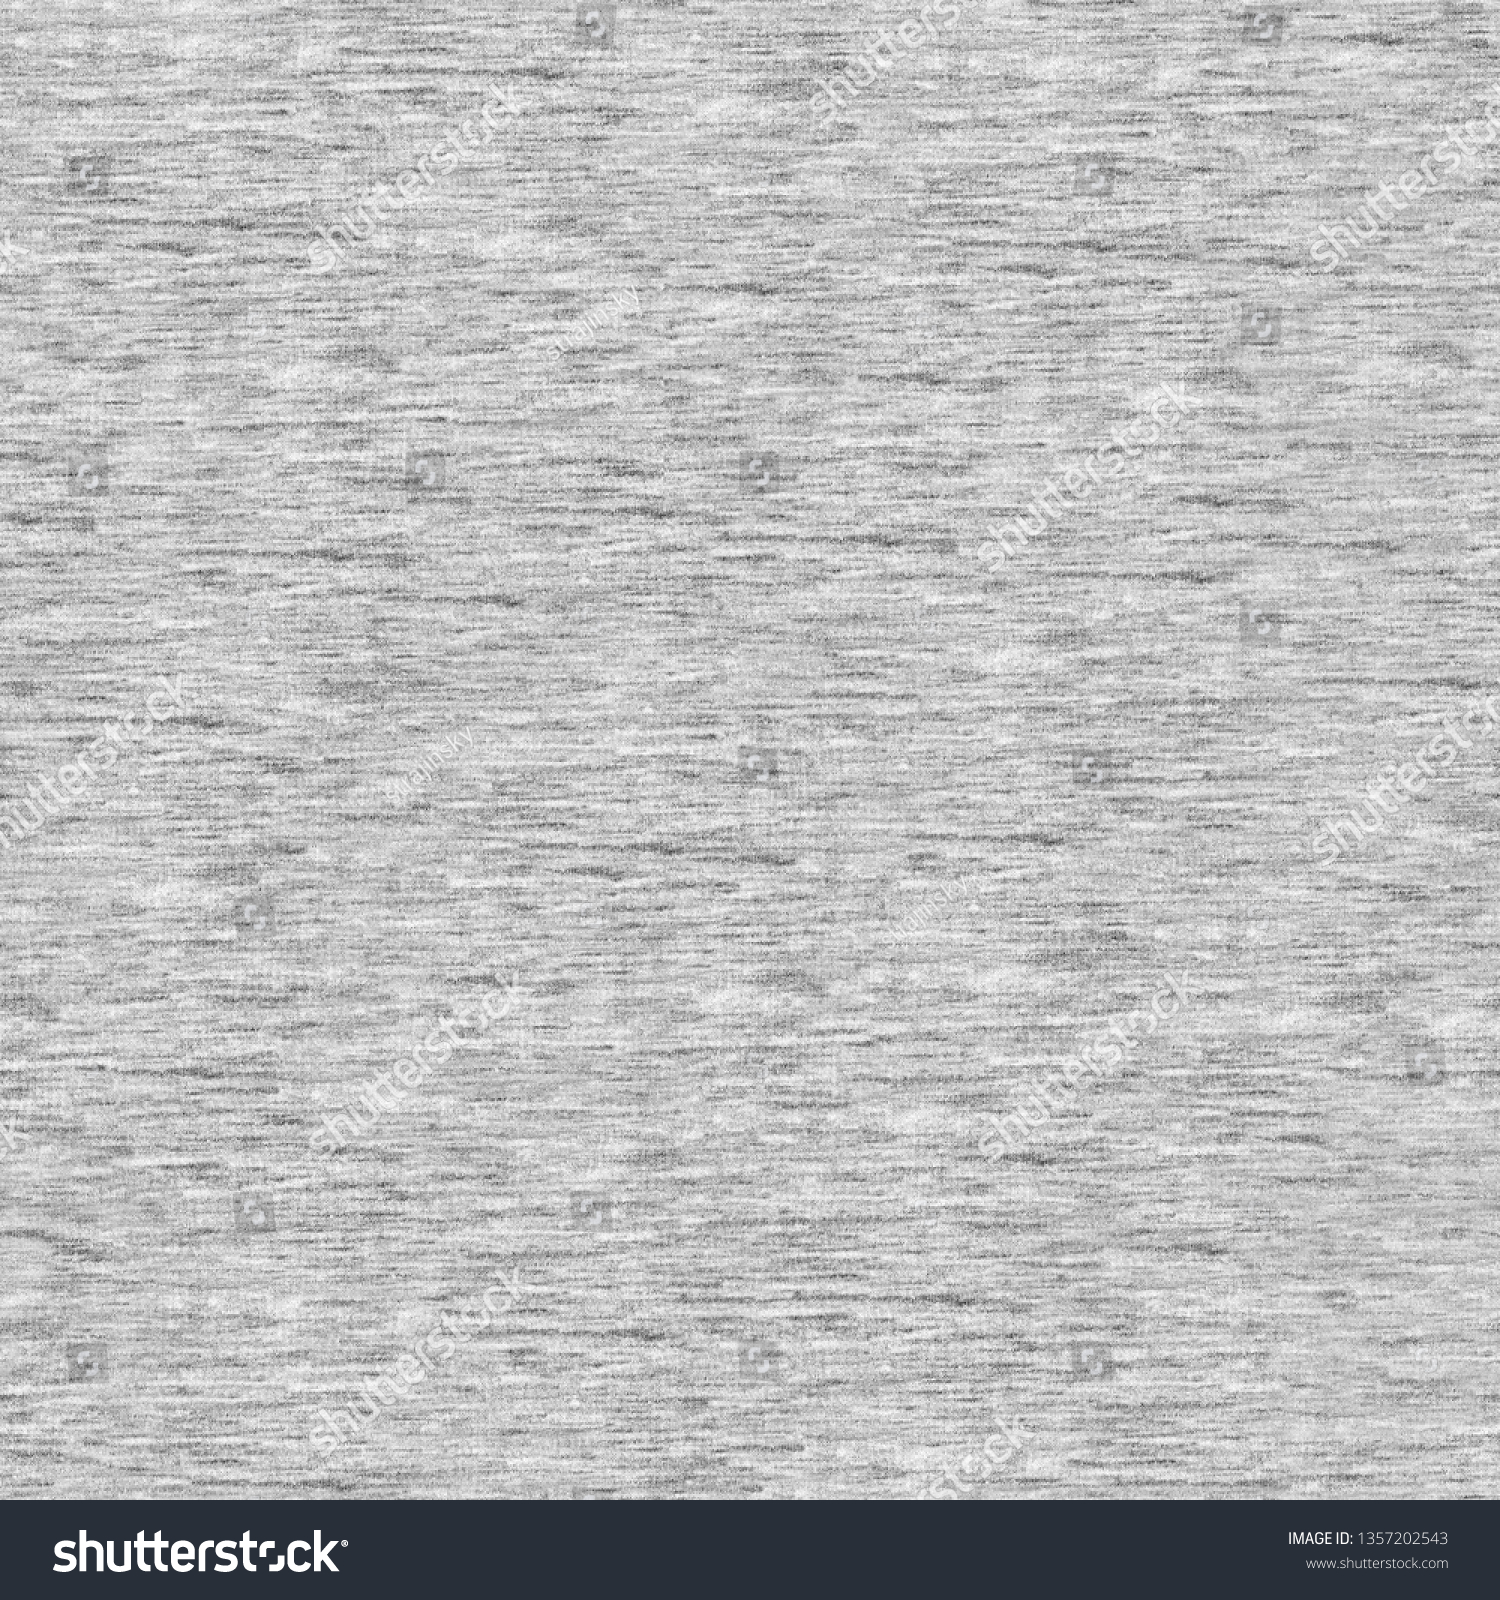 Melange seamless fabric texture.  Gray heather fabric seamless pattern. Real grey knitted fabric. #1357202543